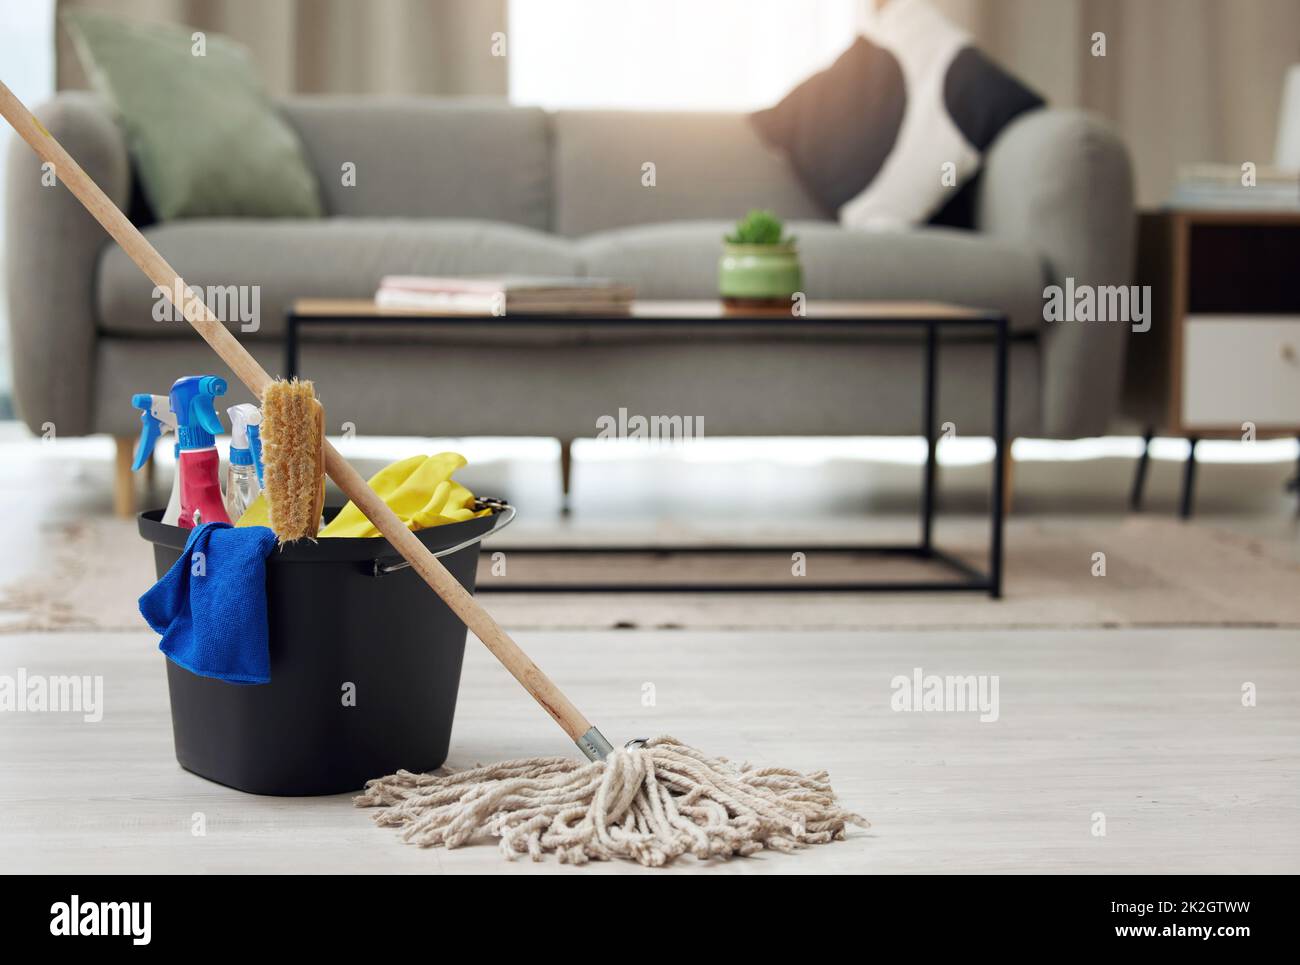 All youll need for deep clean. Shot of a bucket of cleaning supplies. Stock Photo